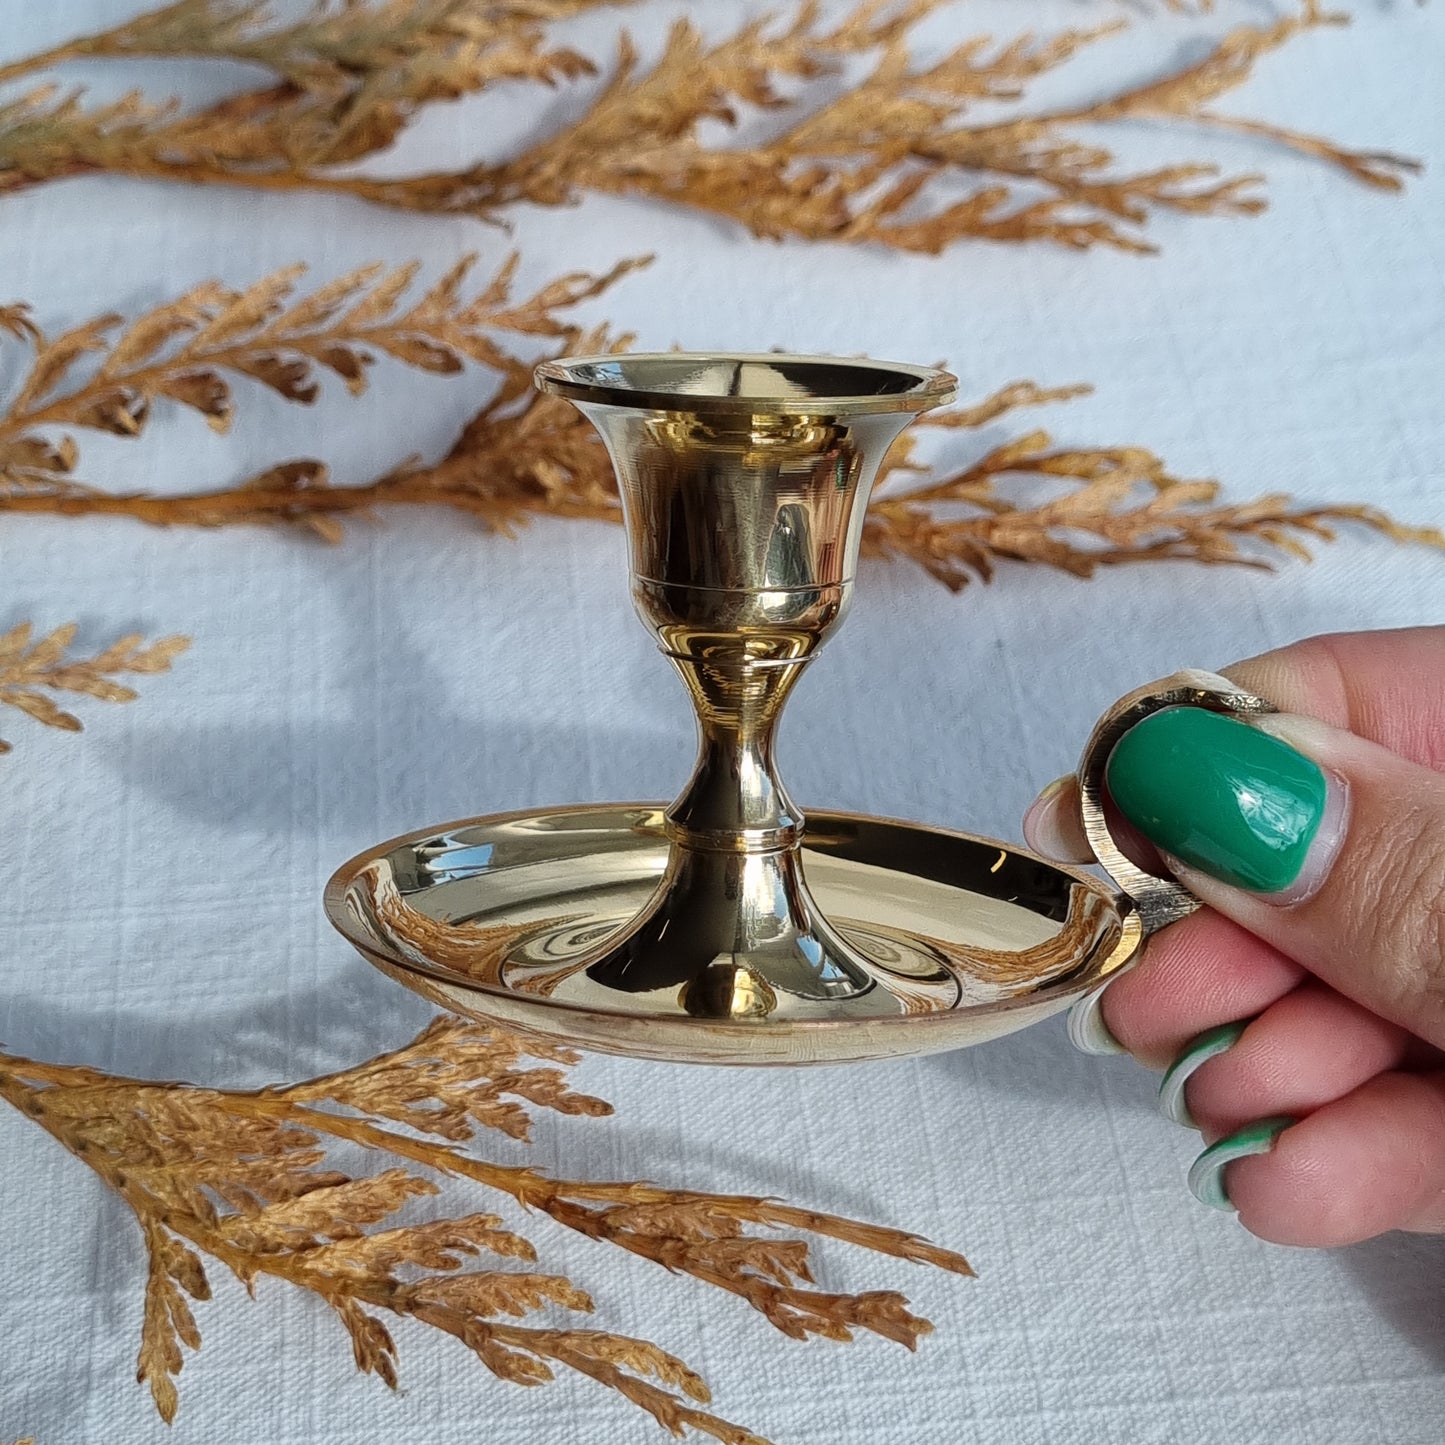 Brass Candle Holder with Handle - Sparrow and Fox